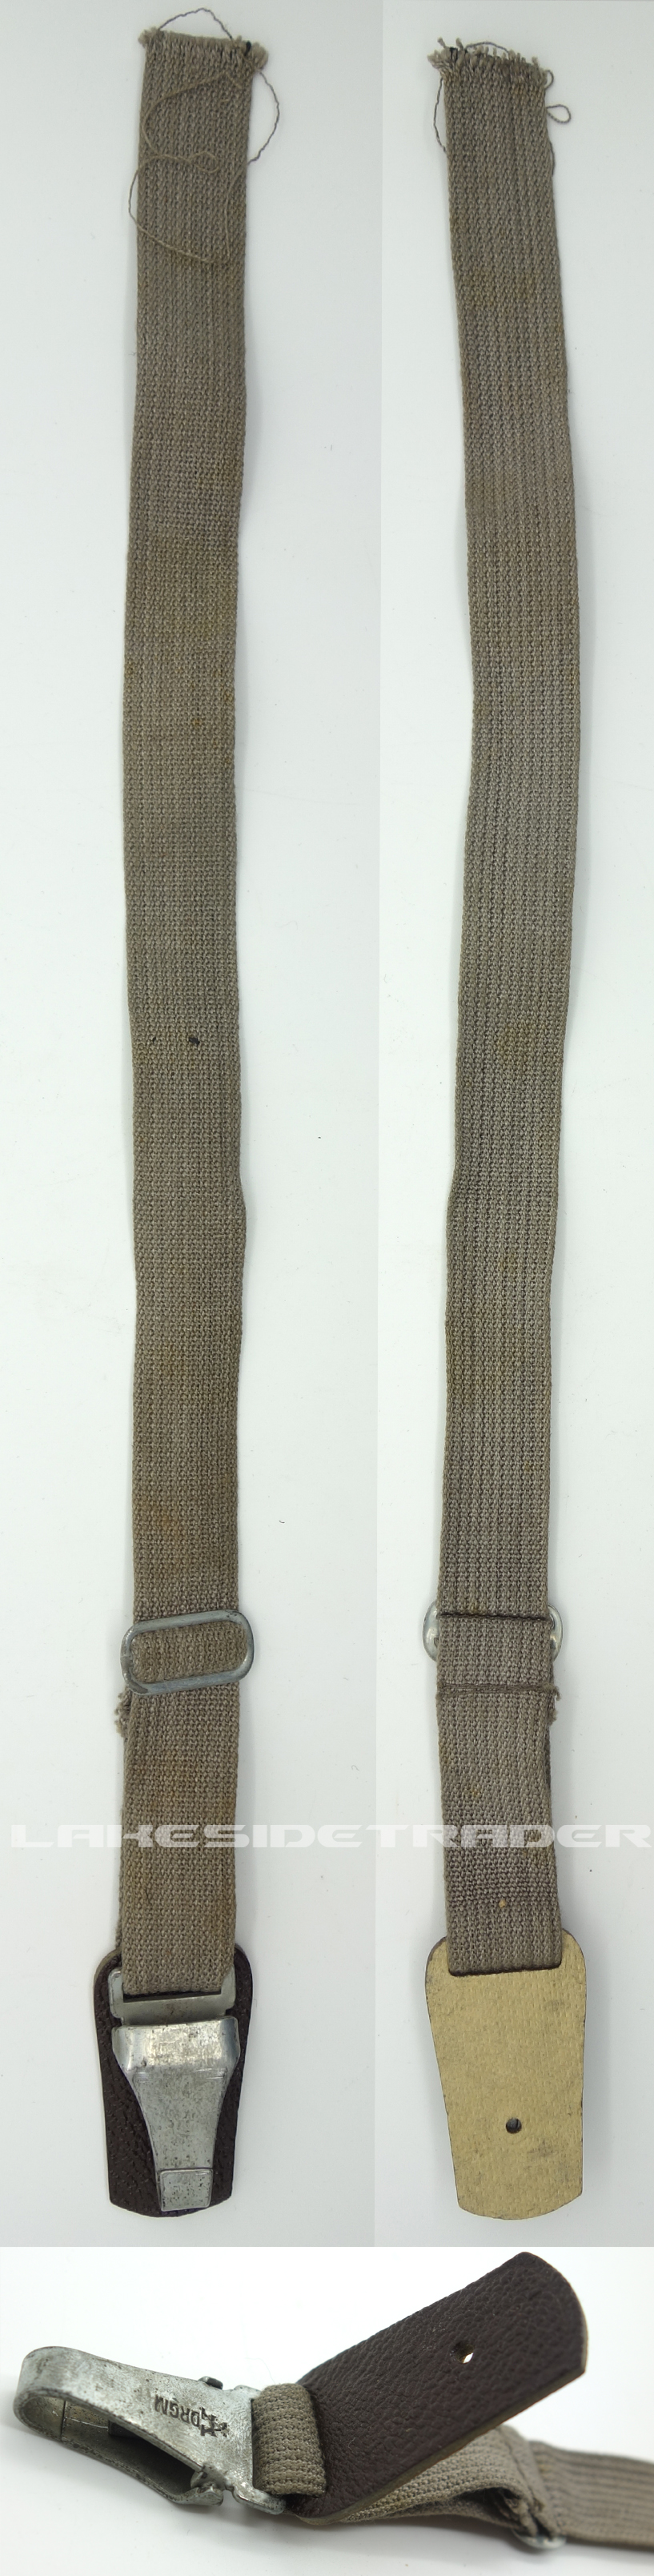 Army under-the -tunic dagger hanger